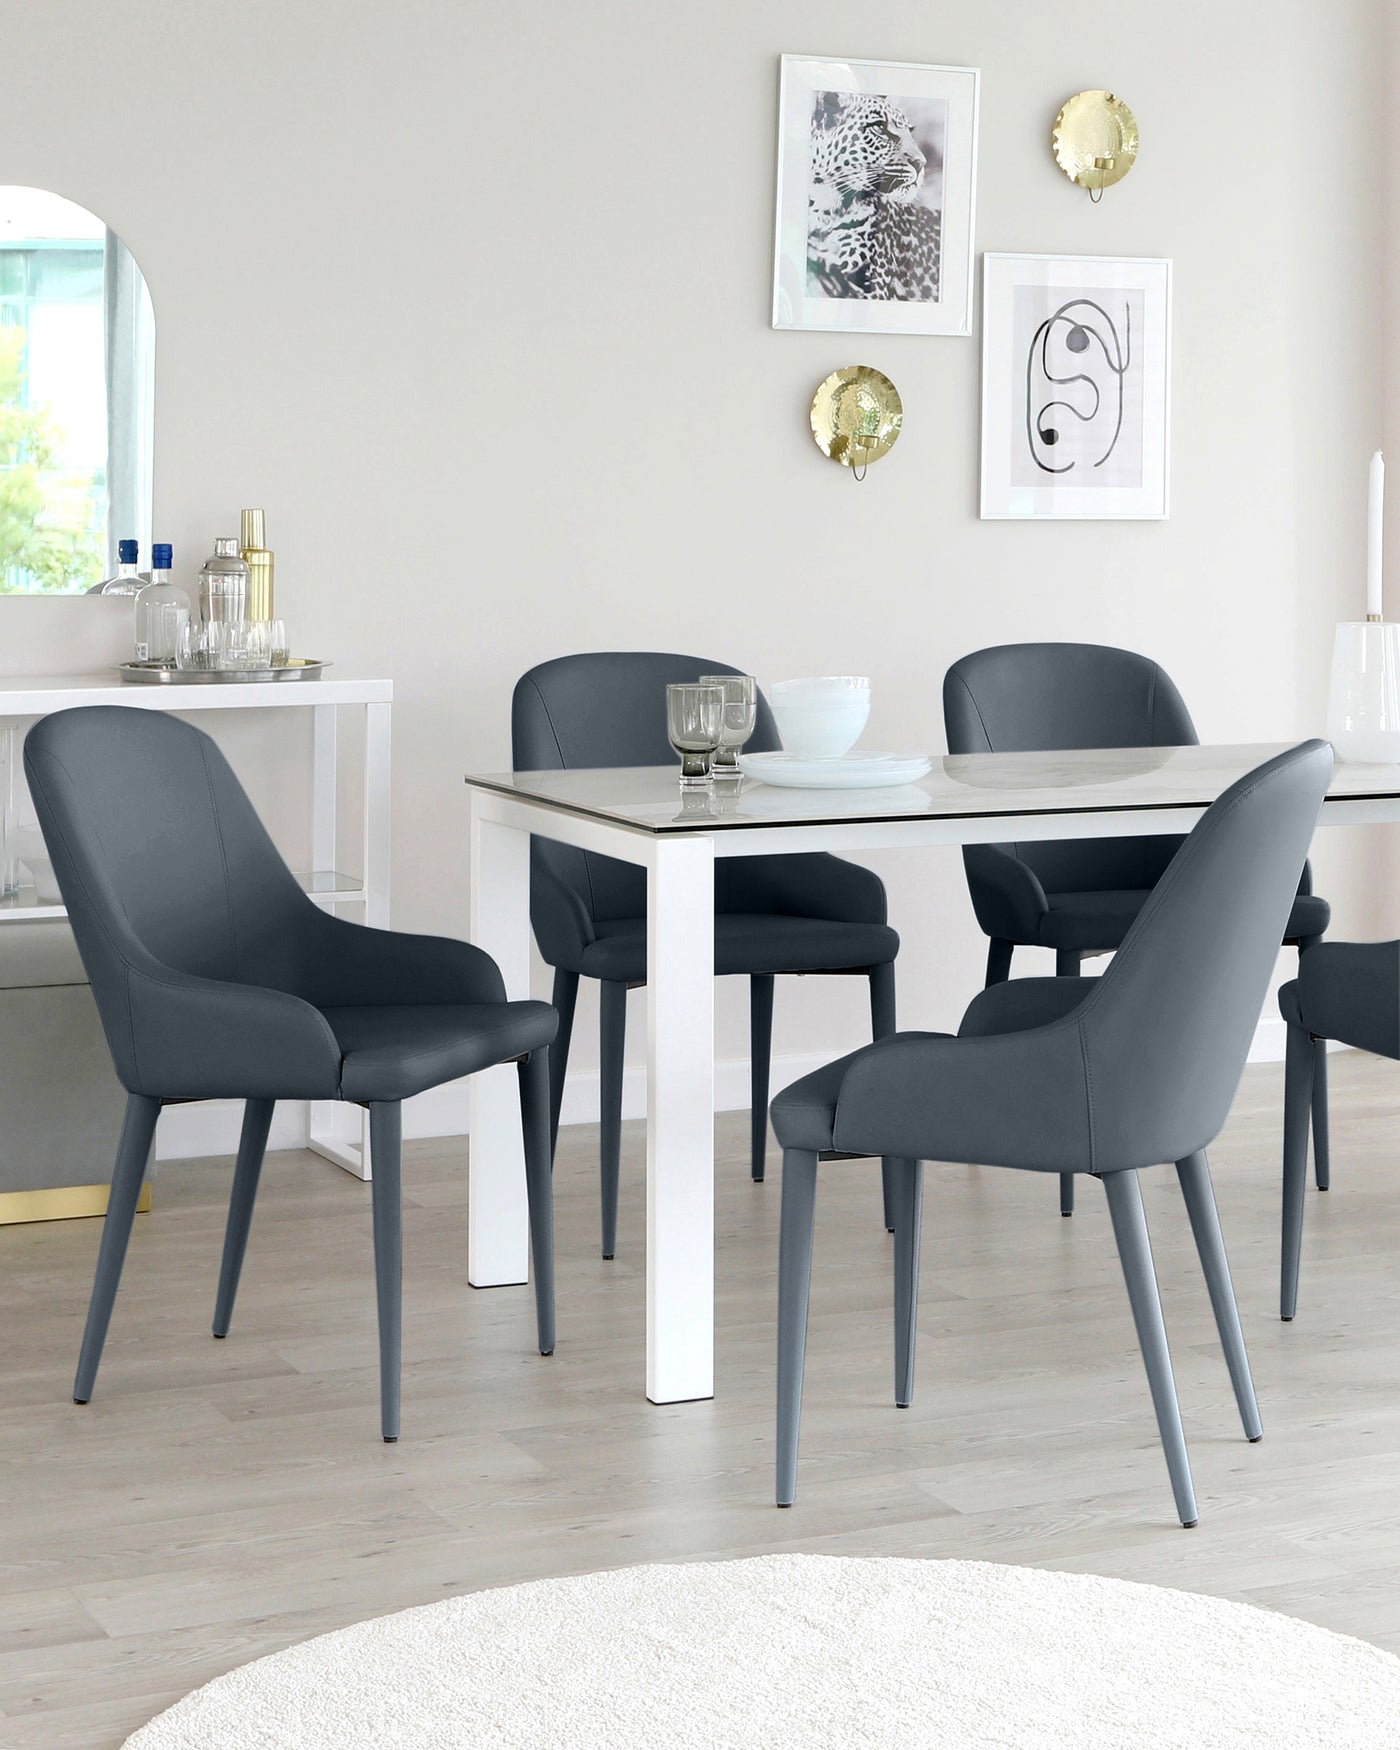 Modern dining set featuring a white rectangular table with a clean, minimal design and four sleek, dark grey upholstered chairs with gently curved backs and angled legs.